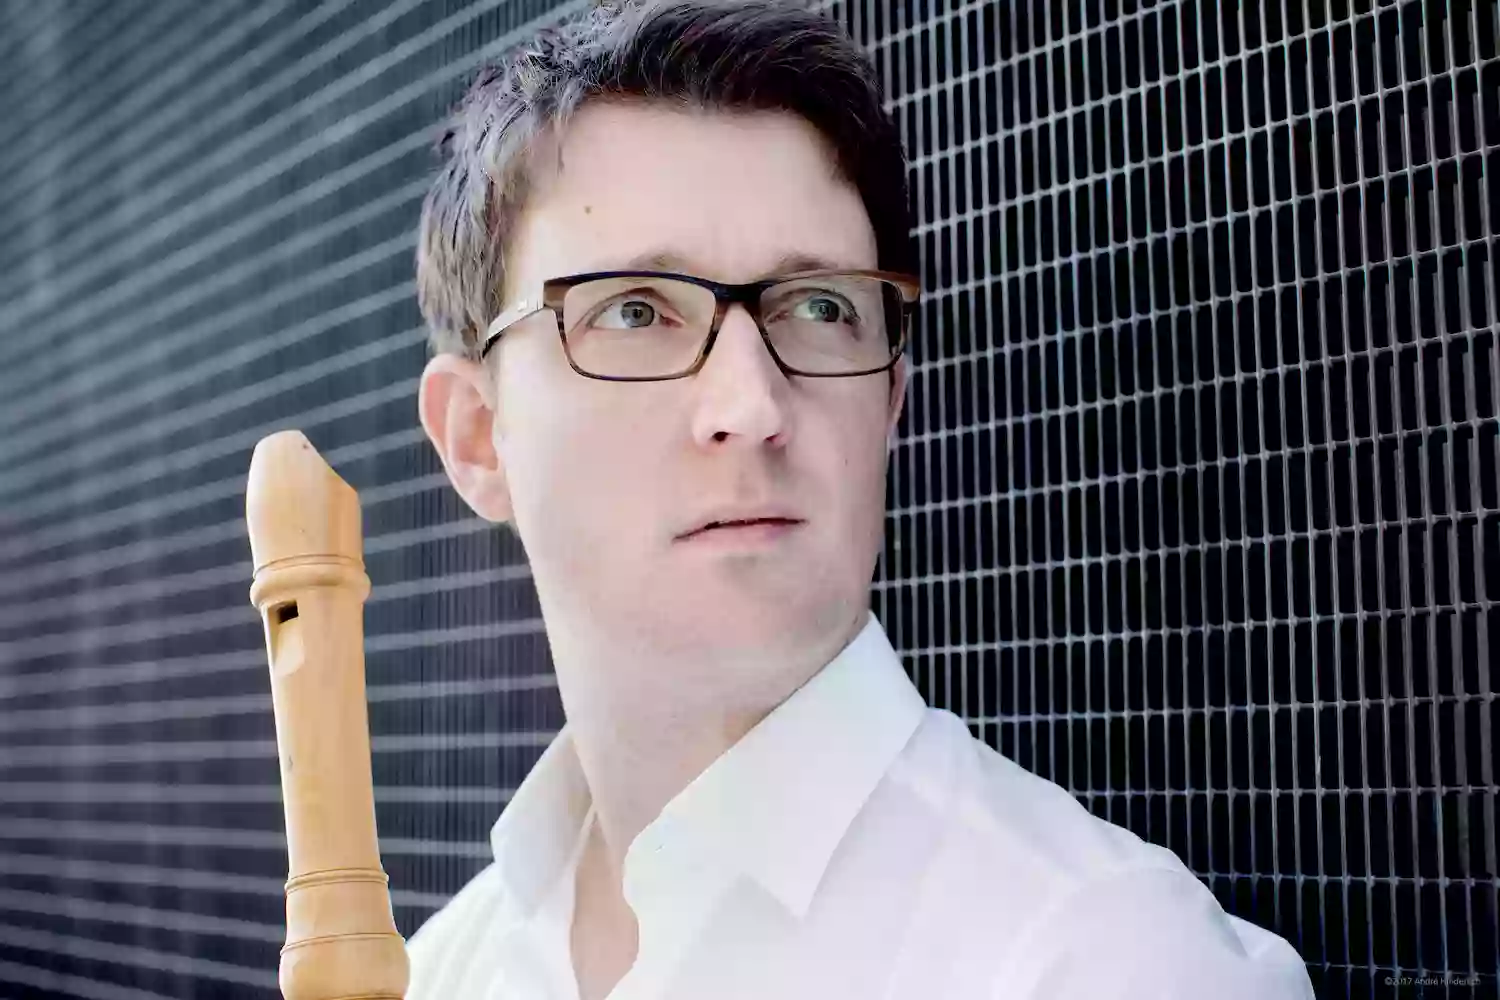 Brendan O'Donnell - Recorder & Early Music